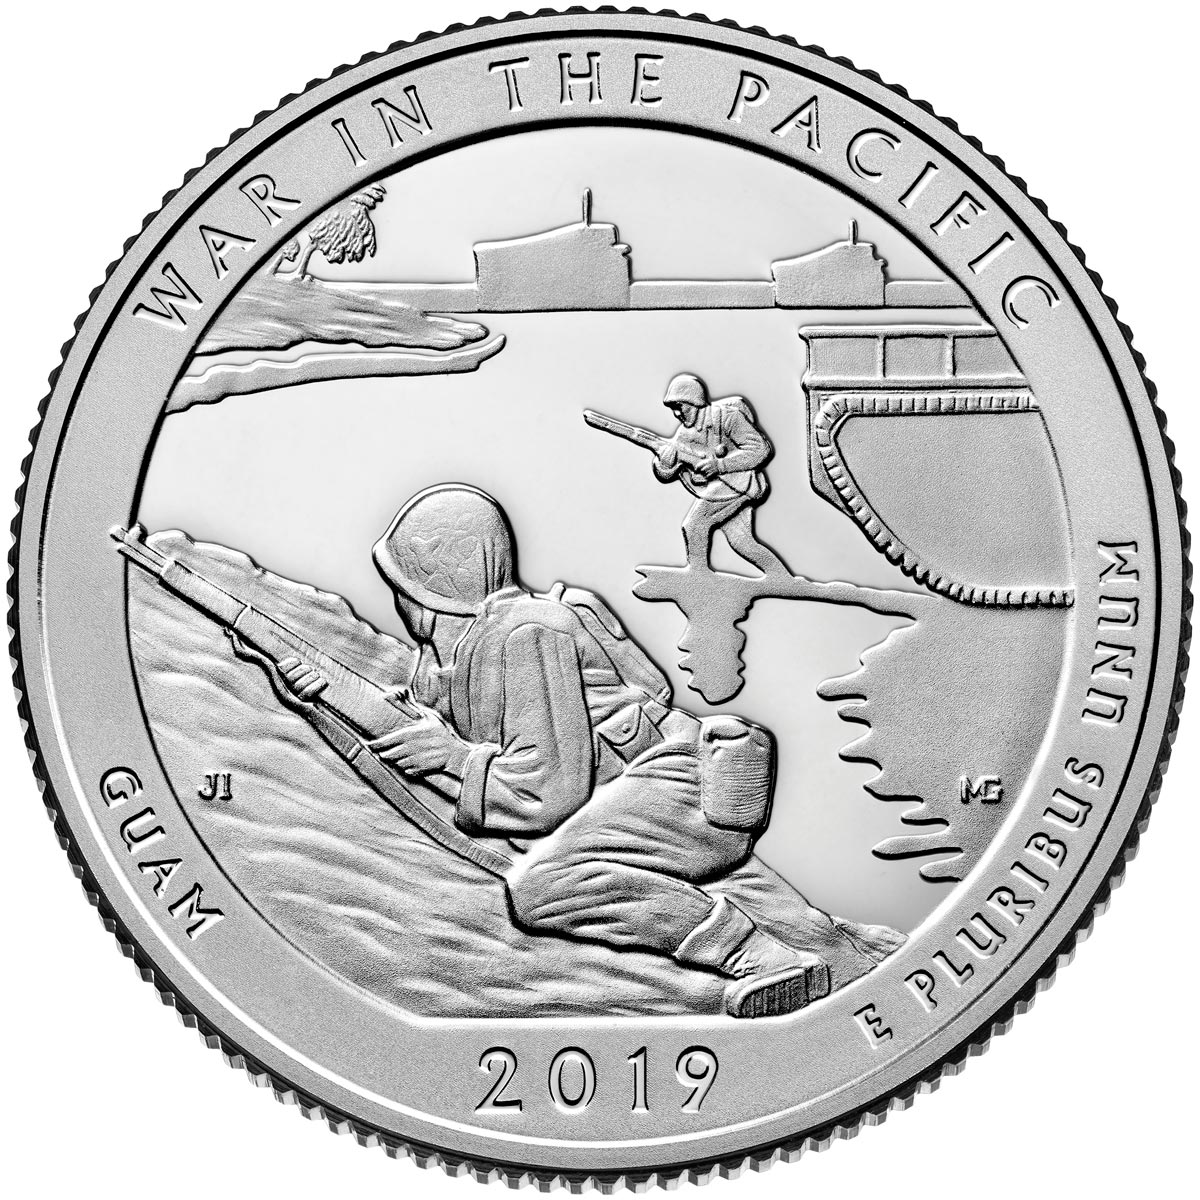 Image of 25 cents coin - War in the Pacific National Historical Park | USA 2019.  The Copper–Nickel (CuNi) coin is of Proof, BU, UNC quality.